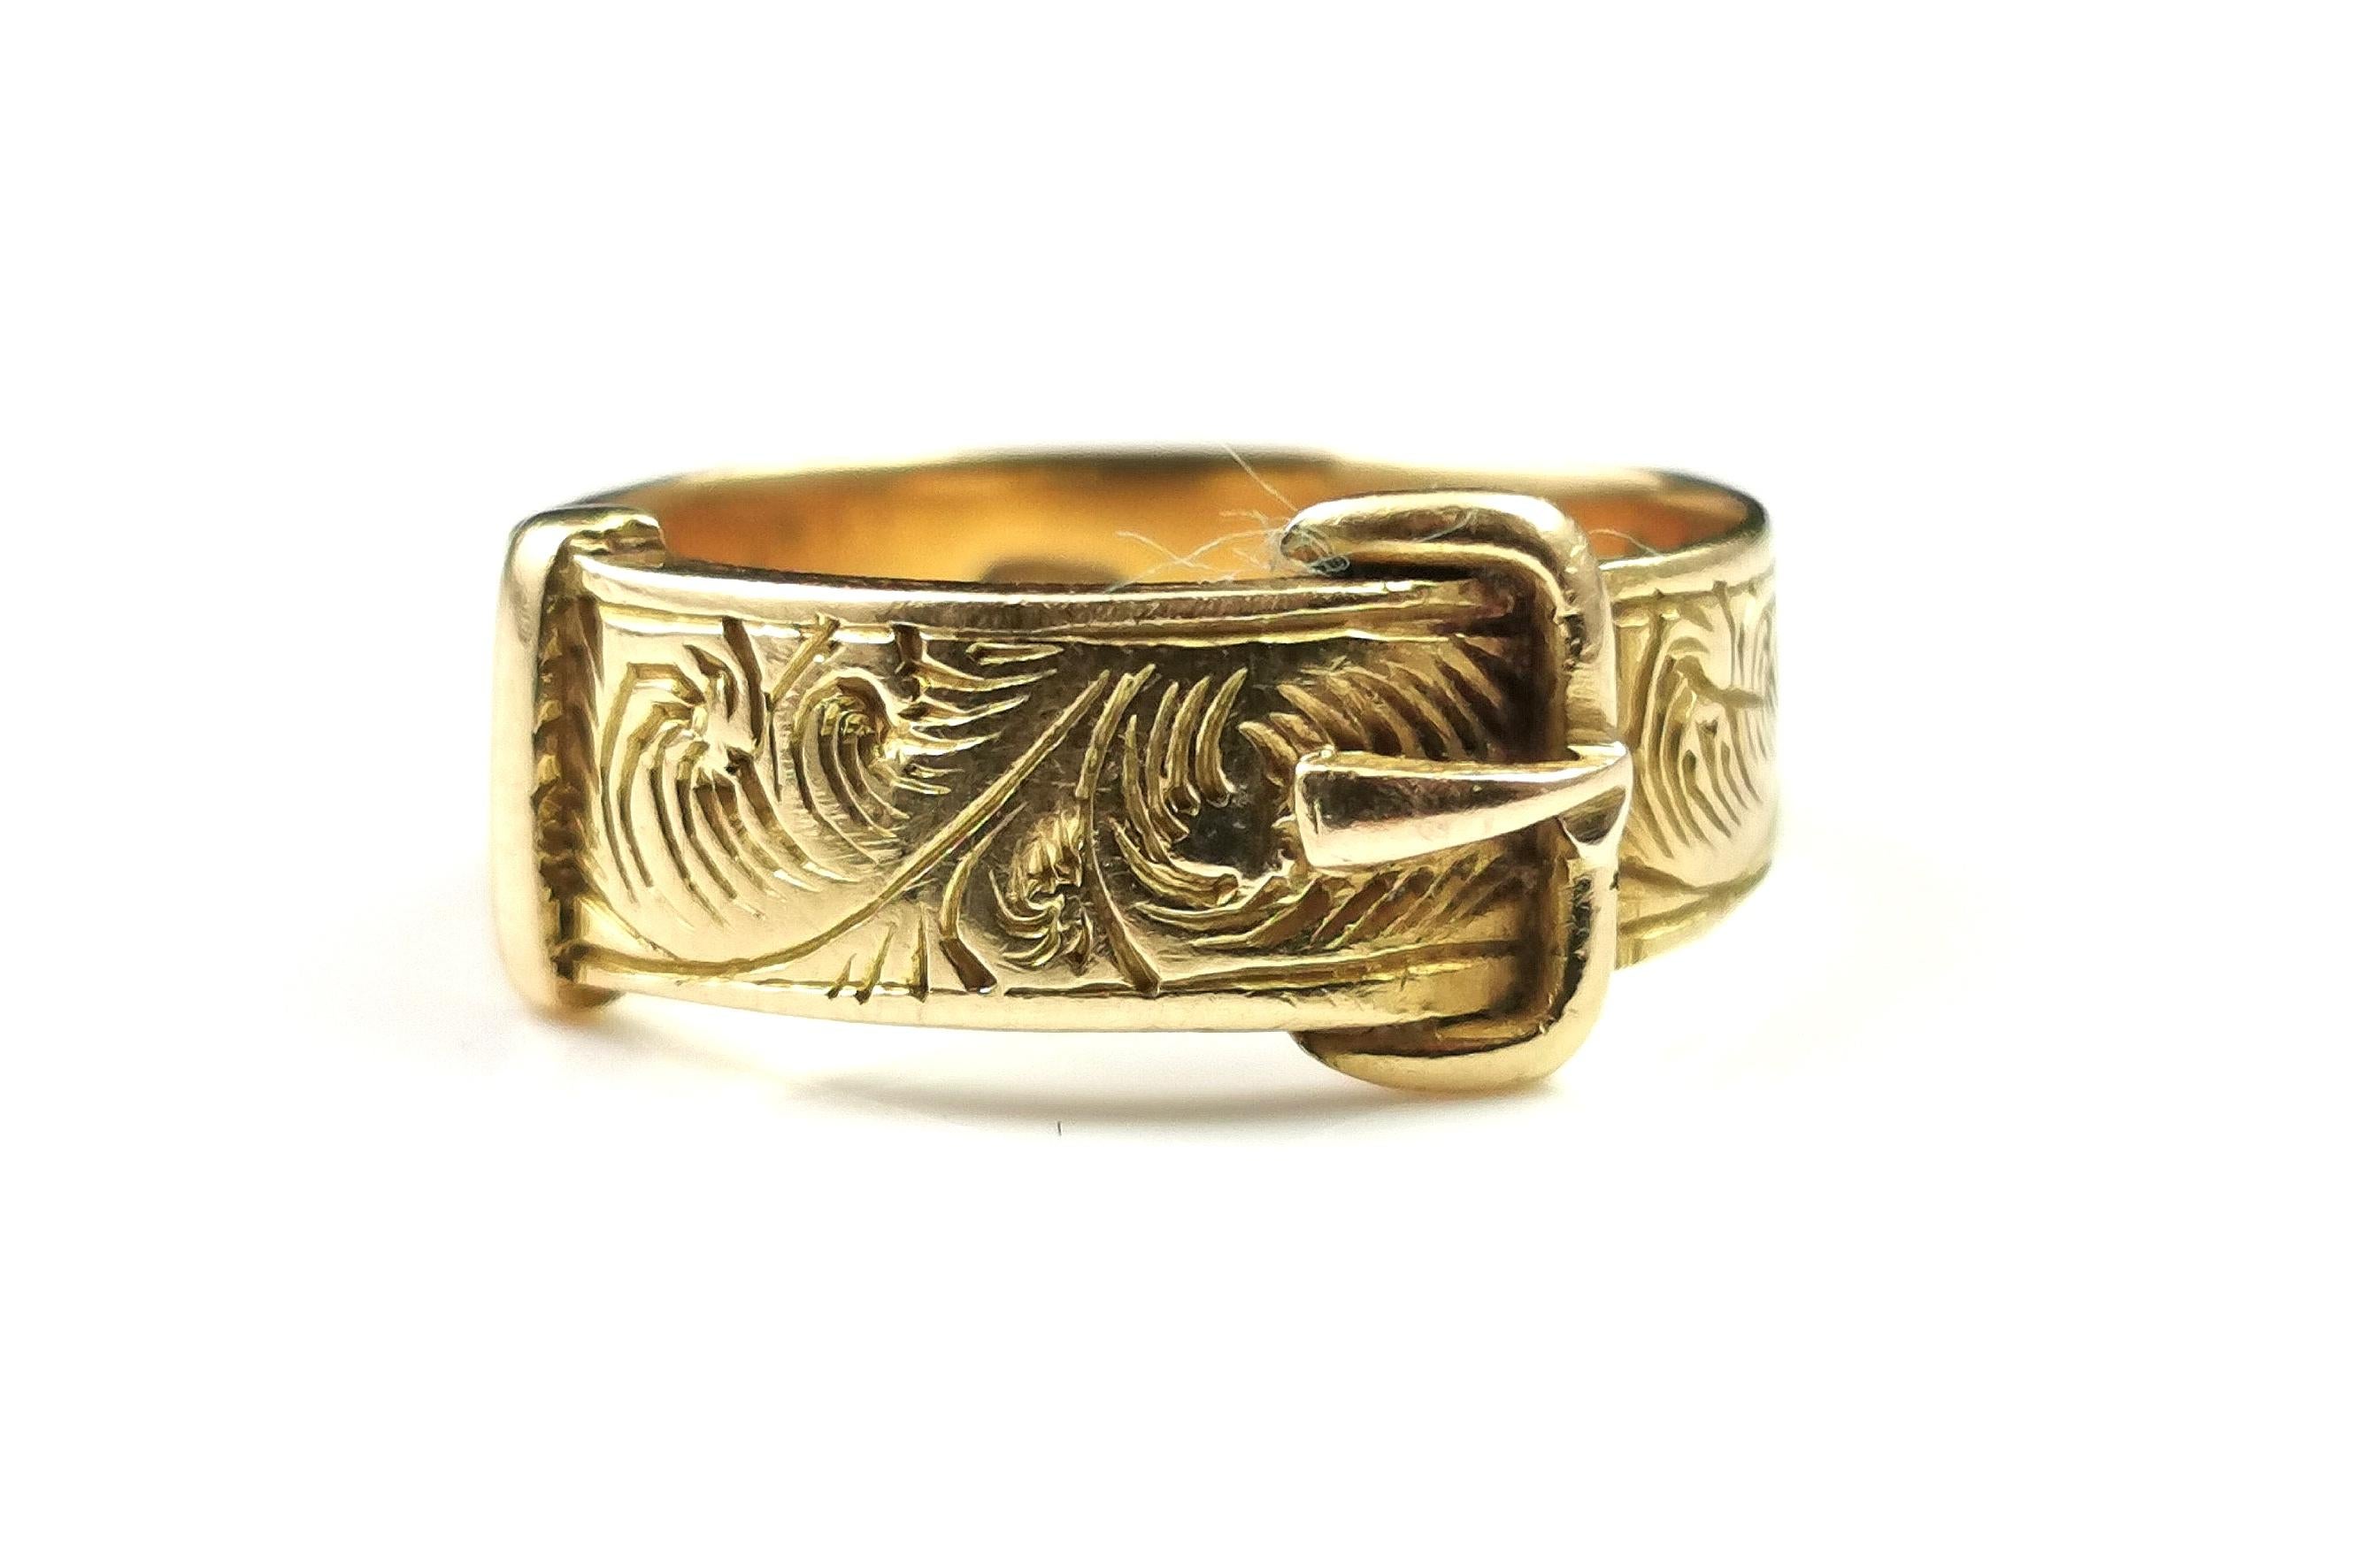 Antique 18k Gold Buckle Ring, Engraved Band 5